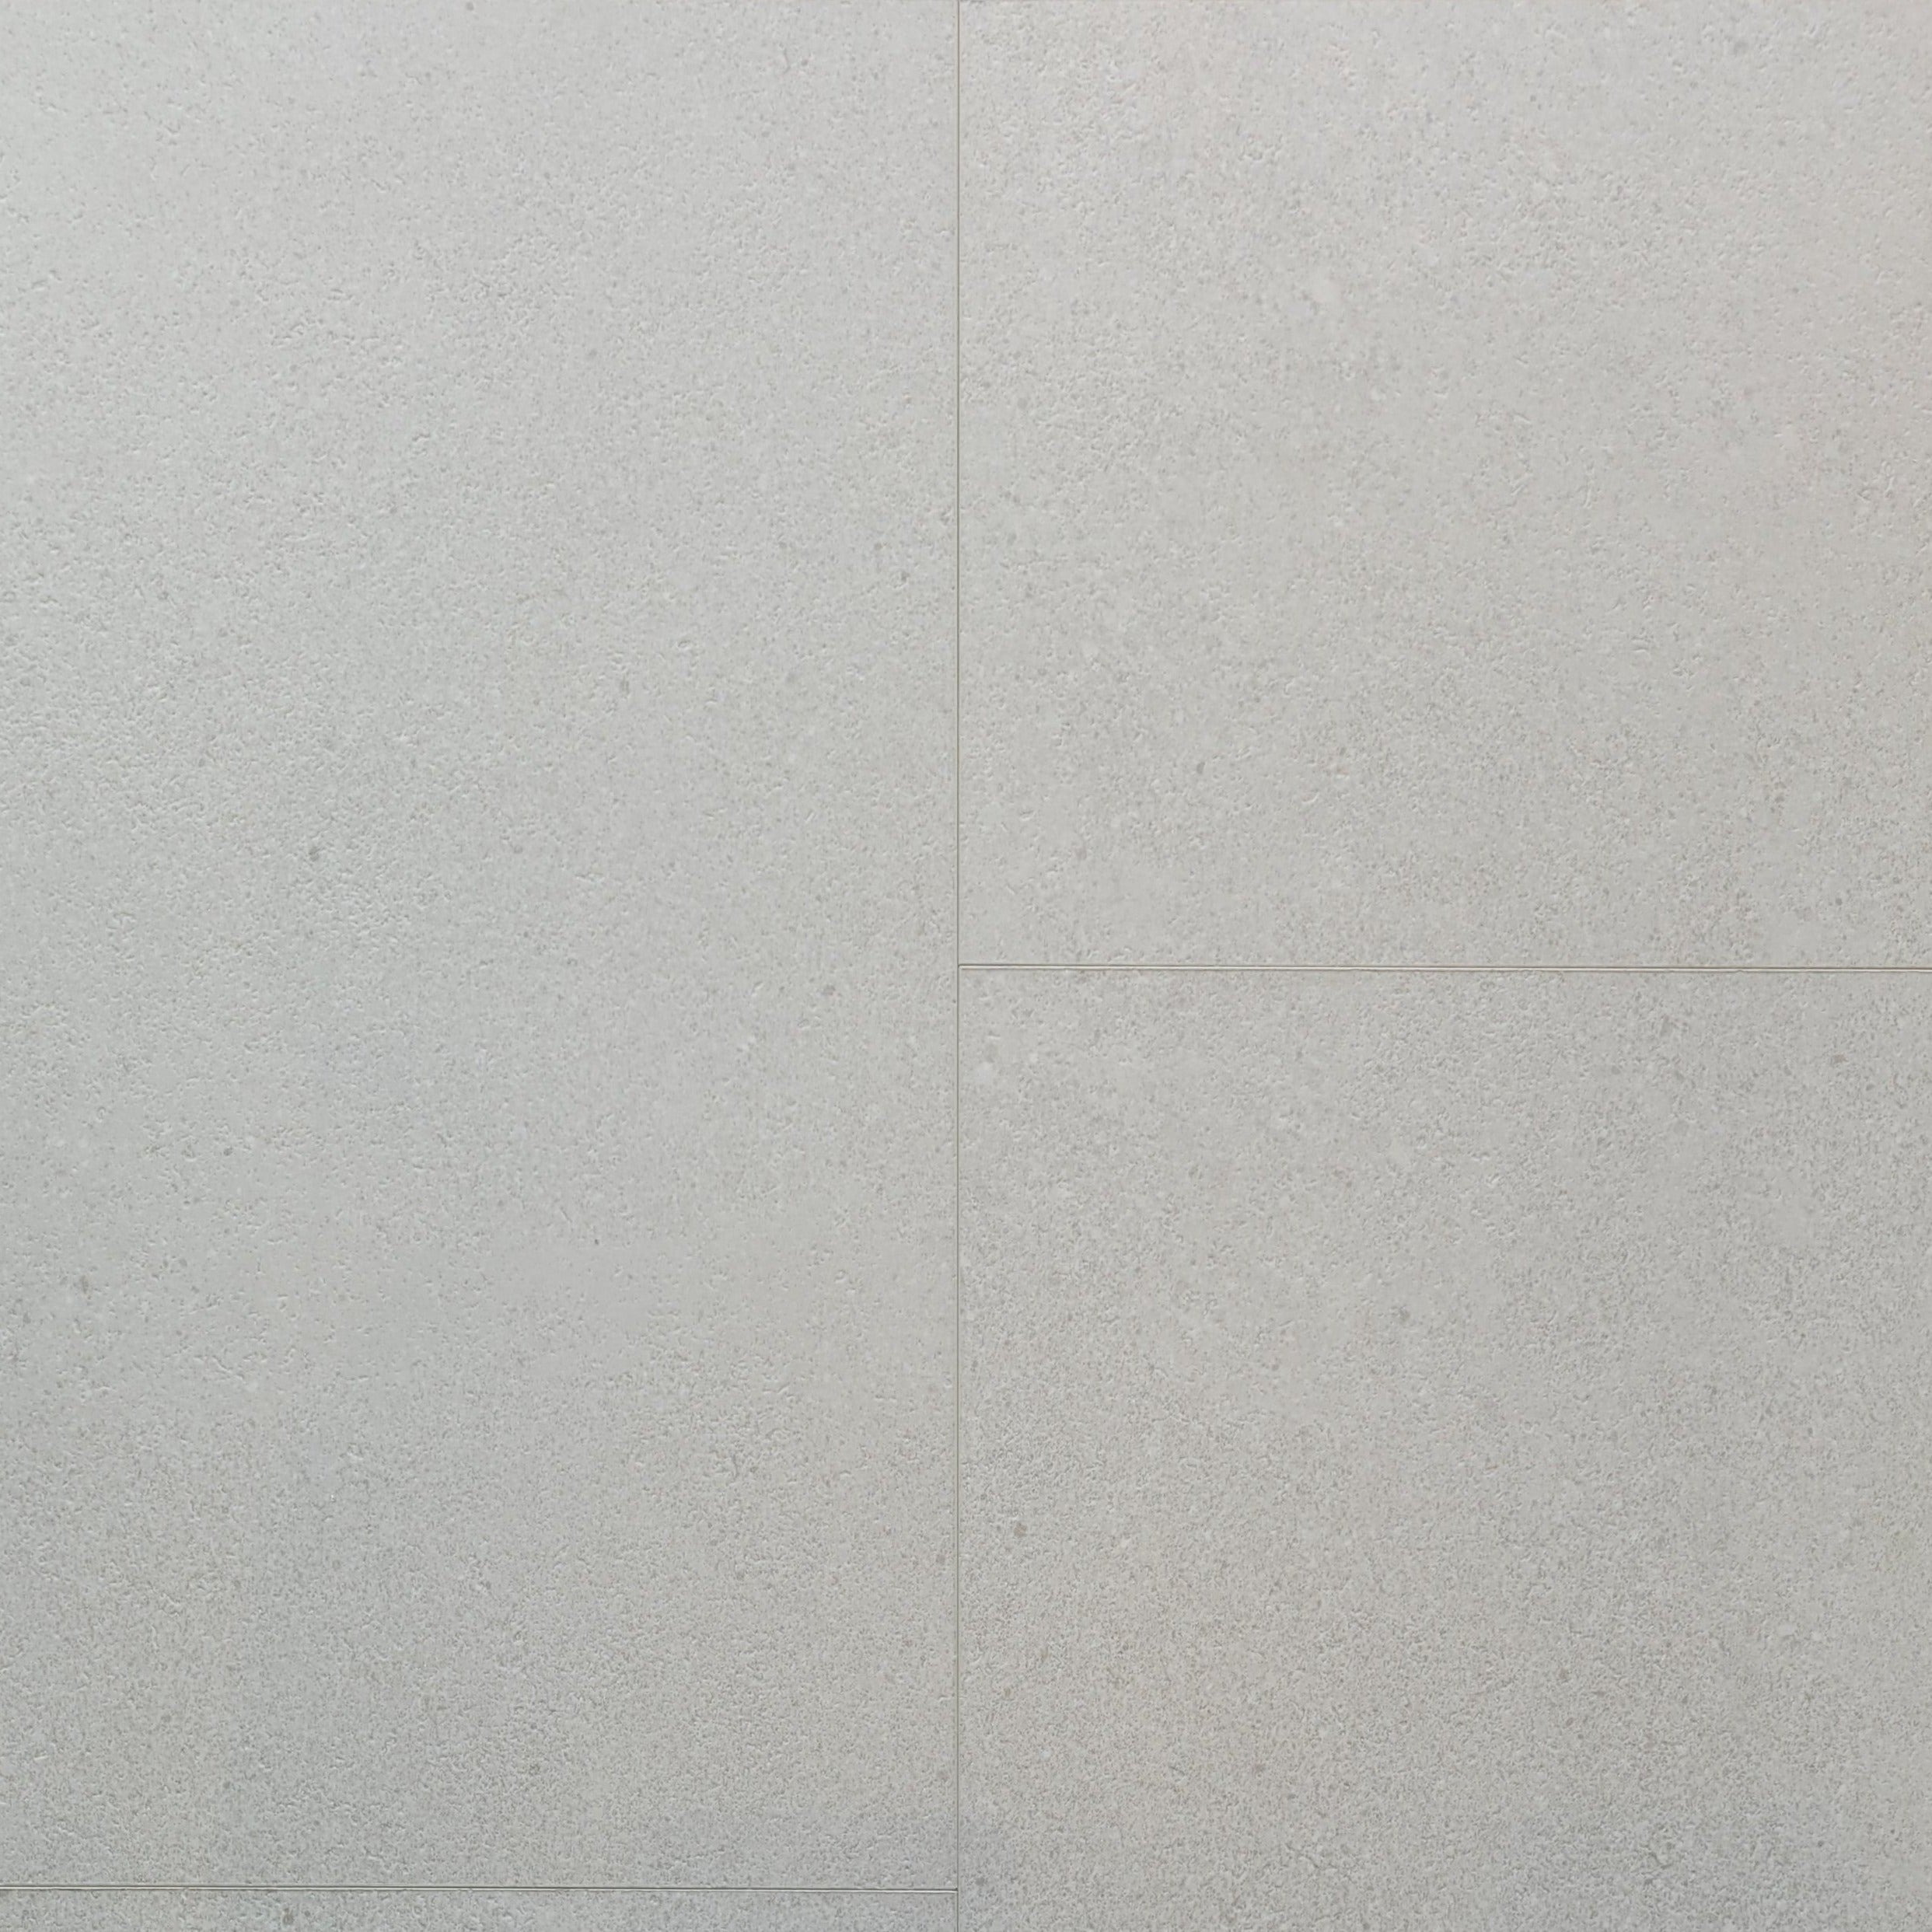 Rosseti Luxury Vinyl Tile (pad attached) $3.99/sf 32.3 sf/box